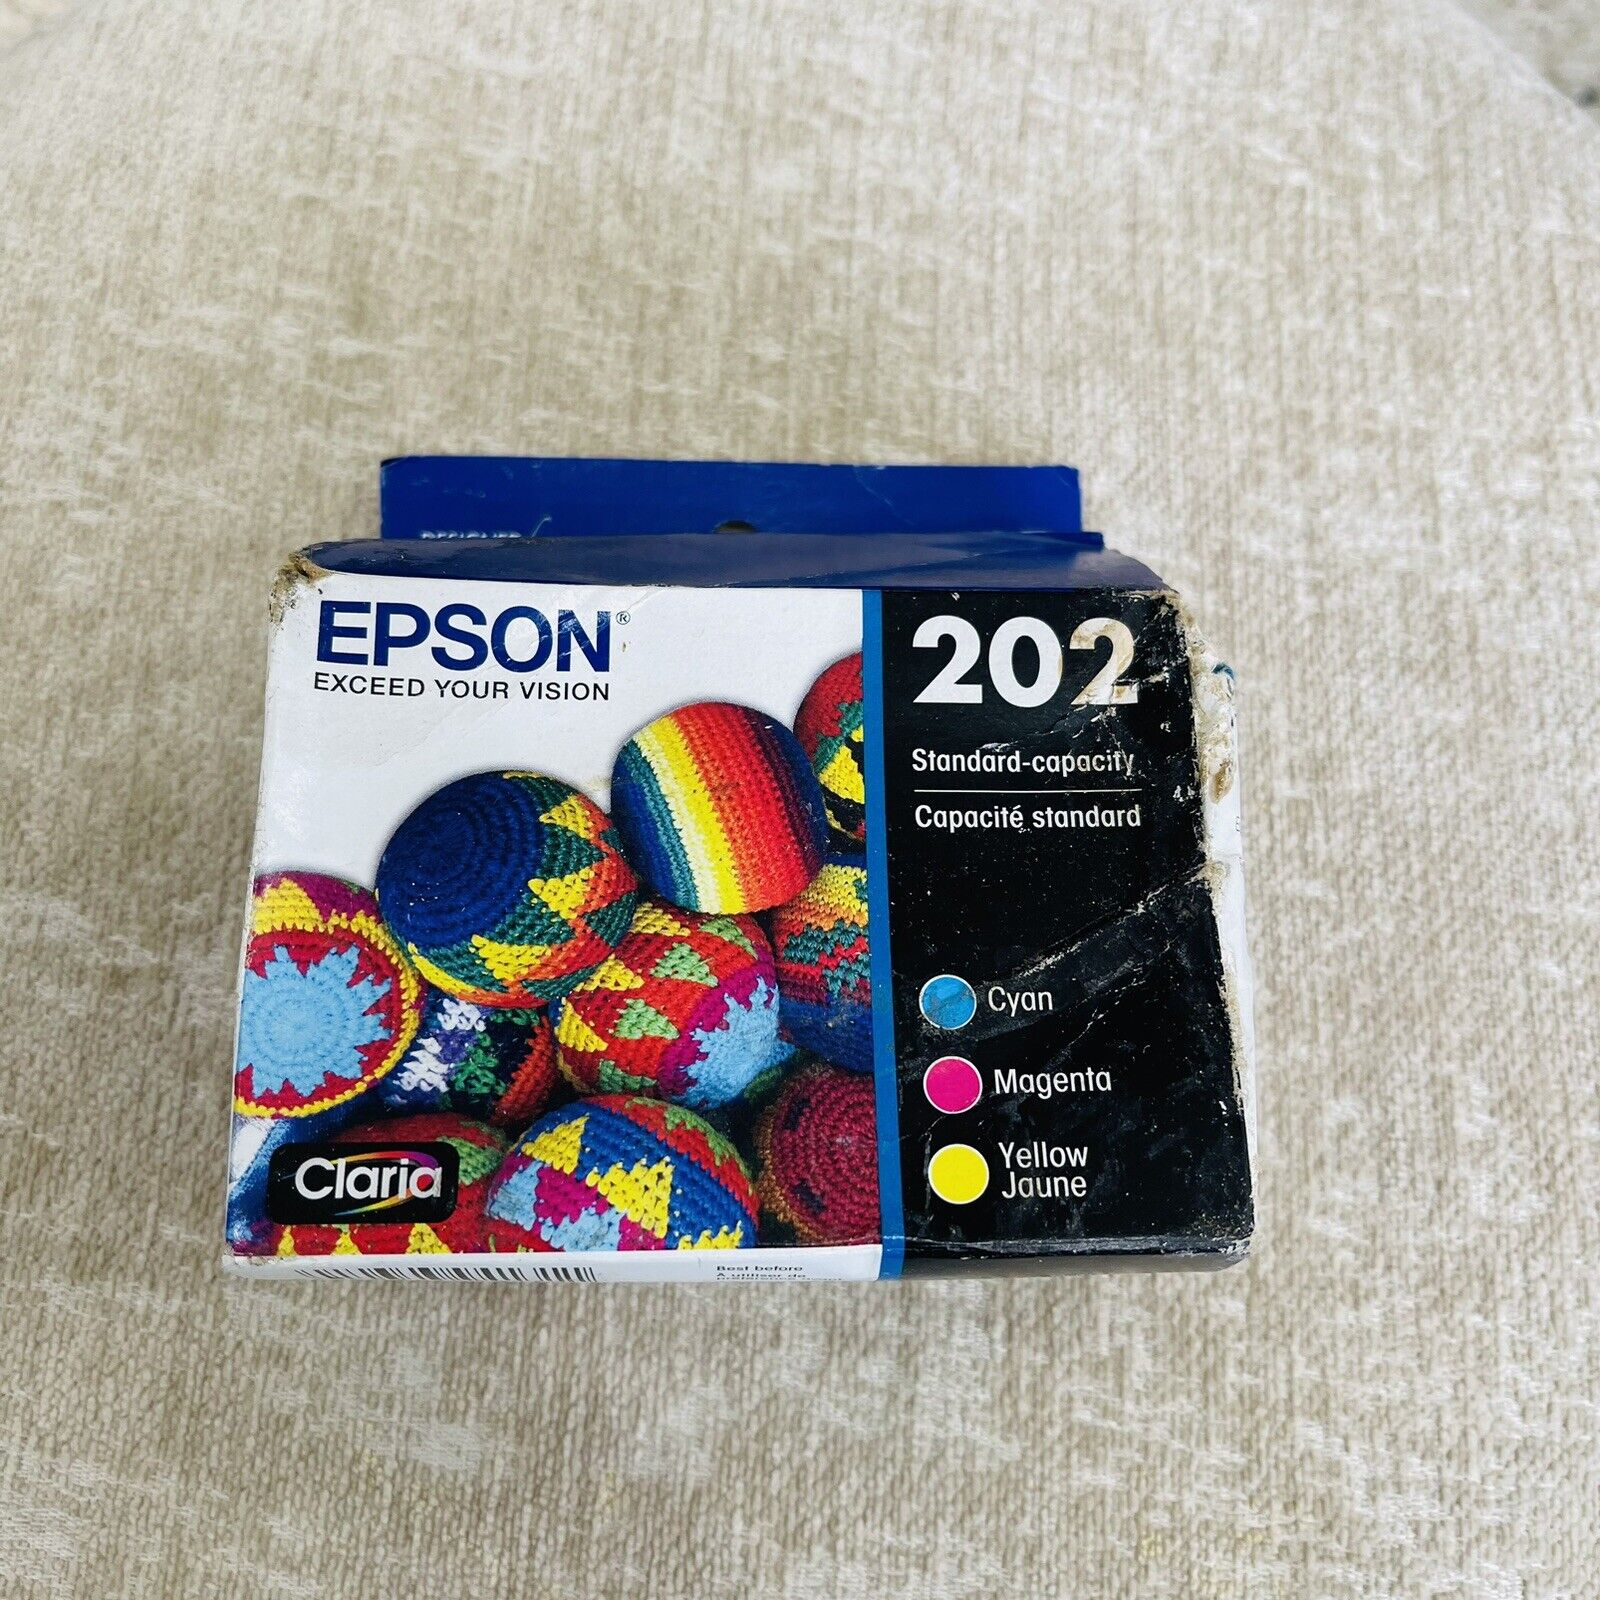 *Deformed Box* Epson 202 Color Ink Cartridge C/M/Y  Expired 5/2024 New